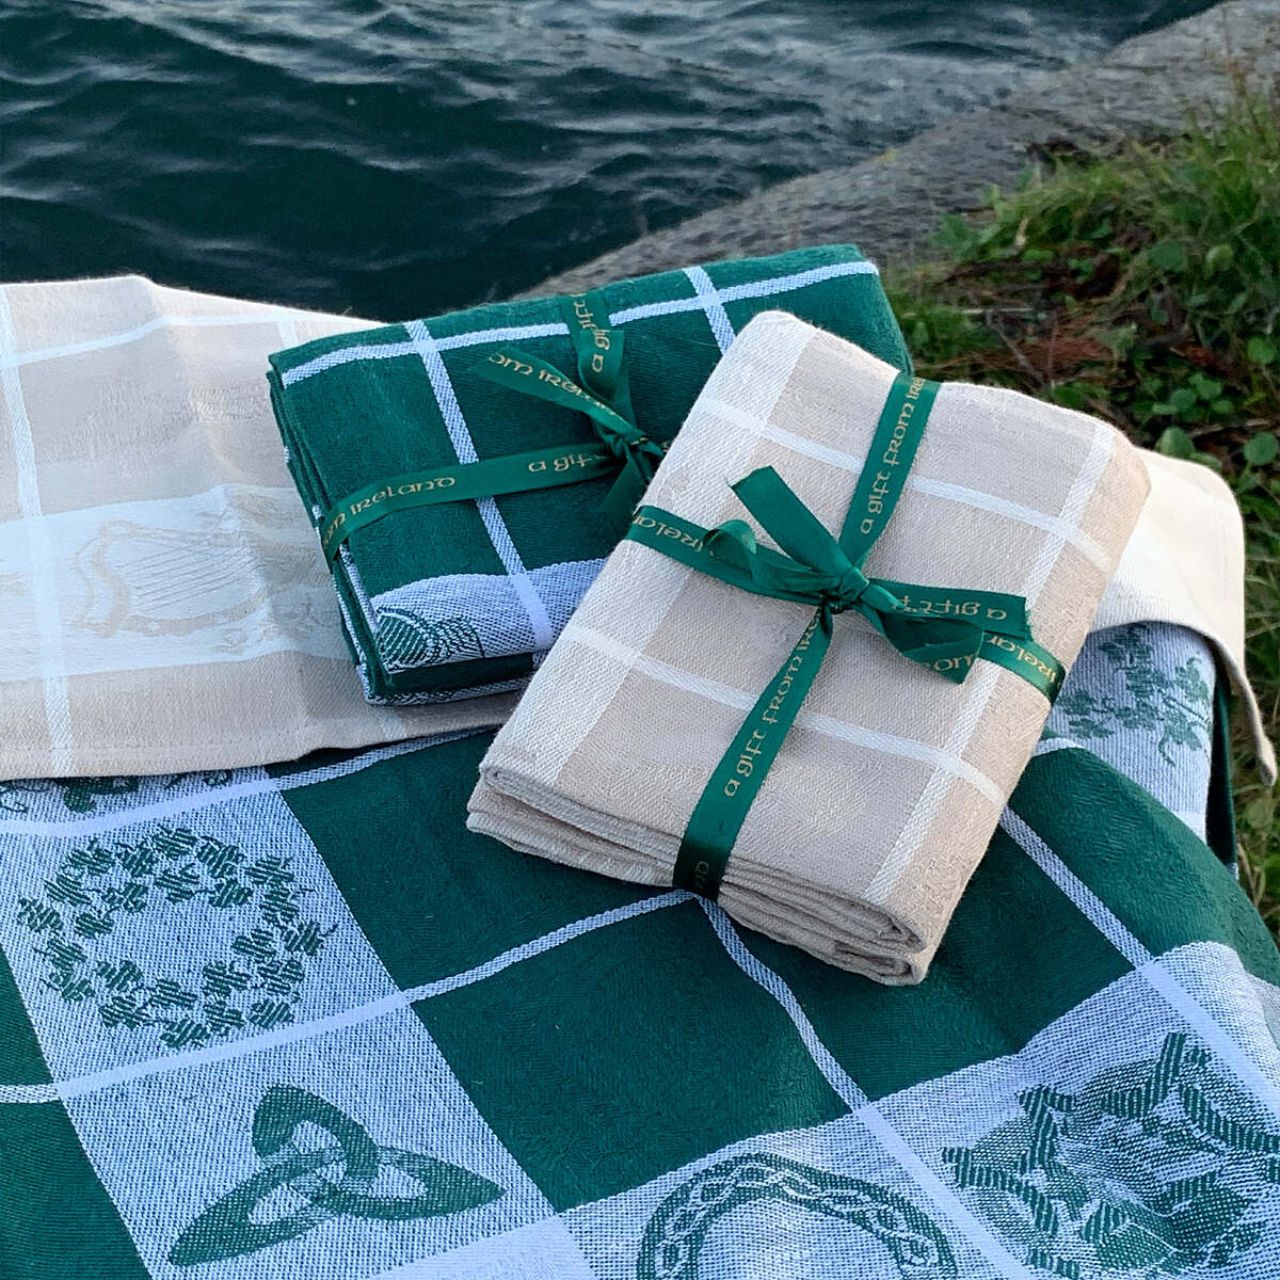 Treasures of Ireland Tea Towel Green by Samuel Lamont  Treasure of Ireland linen union tea towel in beautiful Irish green. This striking colourway comes as a bale of two, tied with elegant green ribbon. Perfect for gifting as a keepsake souvenir with it's iconic Irish symbols.